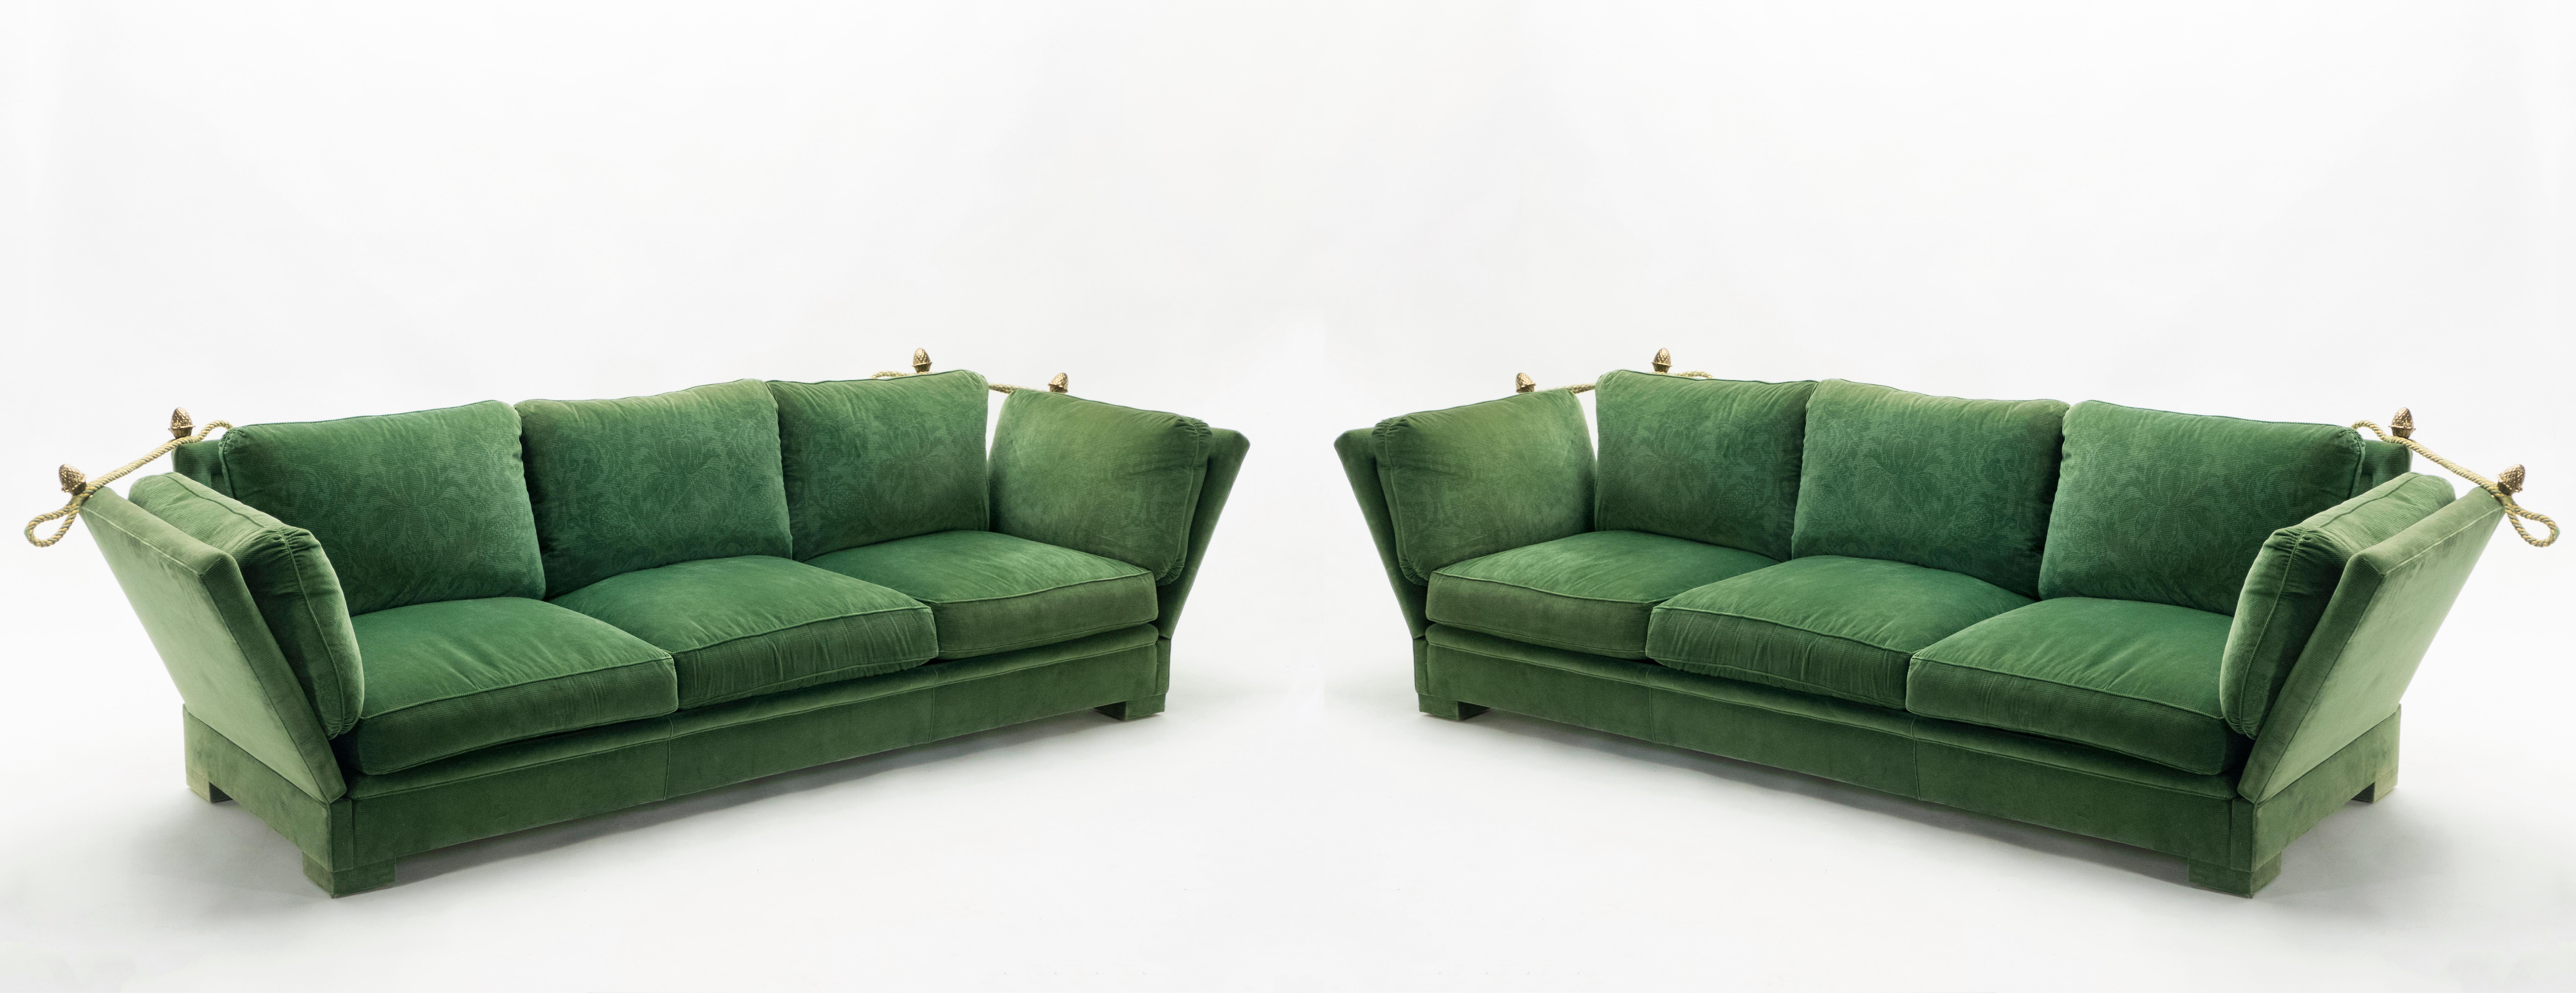 The beautiful forest green velvet fabric of this pair of Mid-Century Modern sofas by Maison Jansen is the original 1970s upholstery and has been maintained in very good vintage condition. With inventive, extendable armrests inspired from 19th